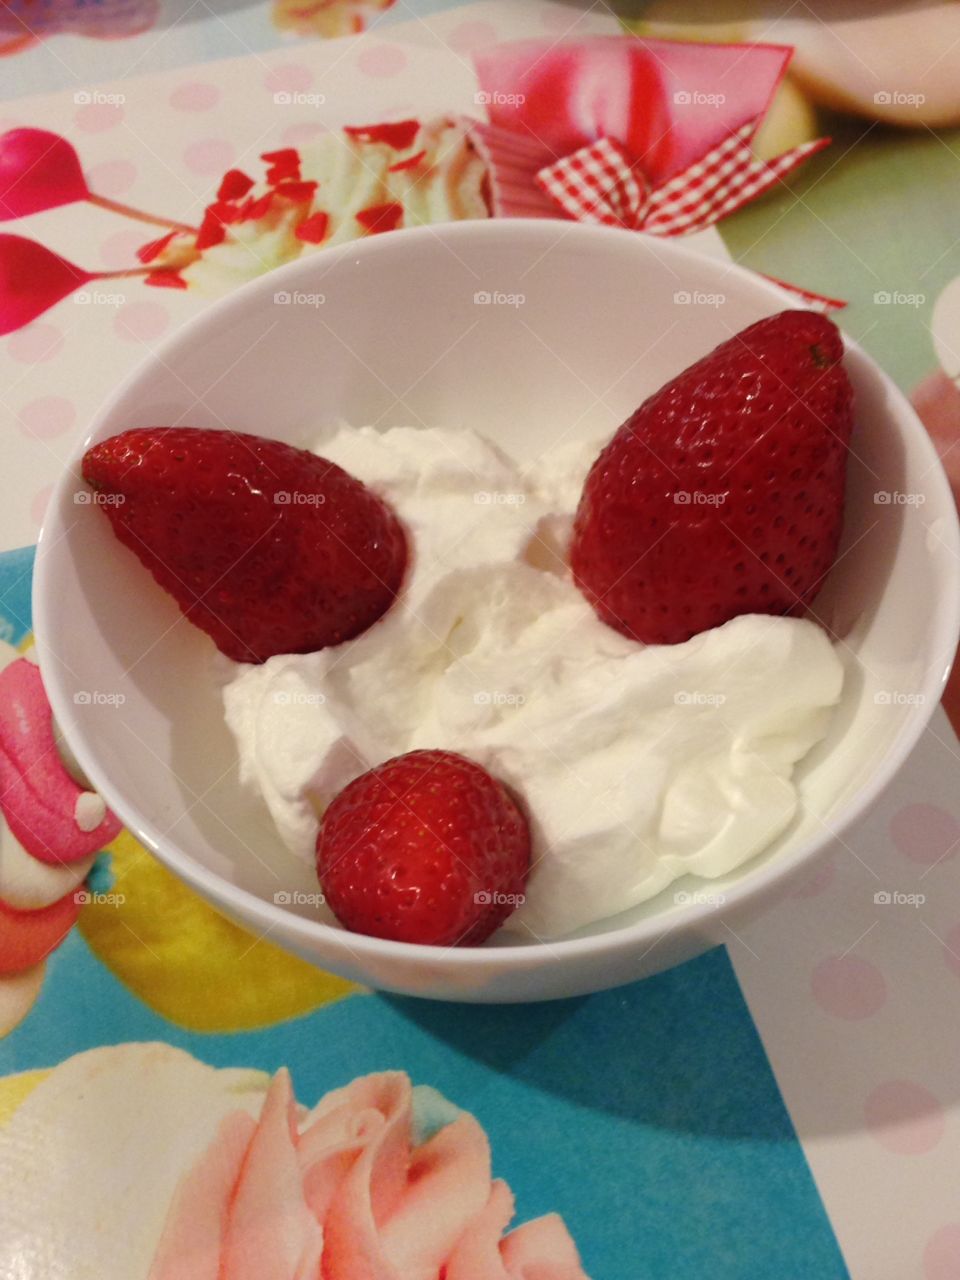 Strawberries with whipped cream 